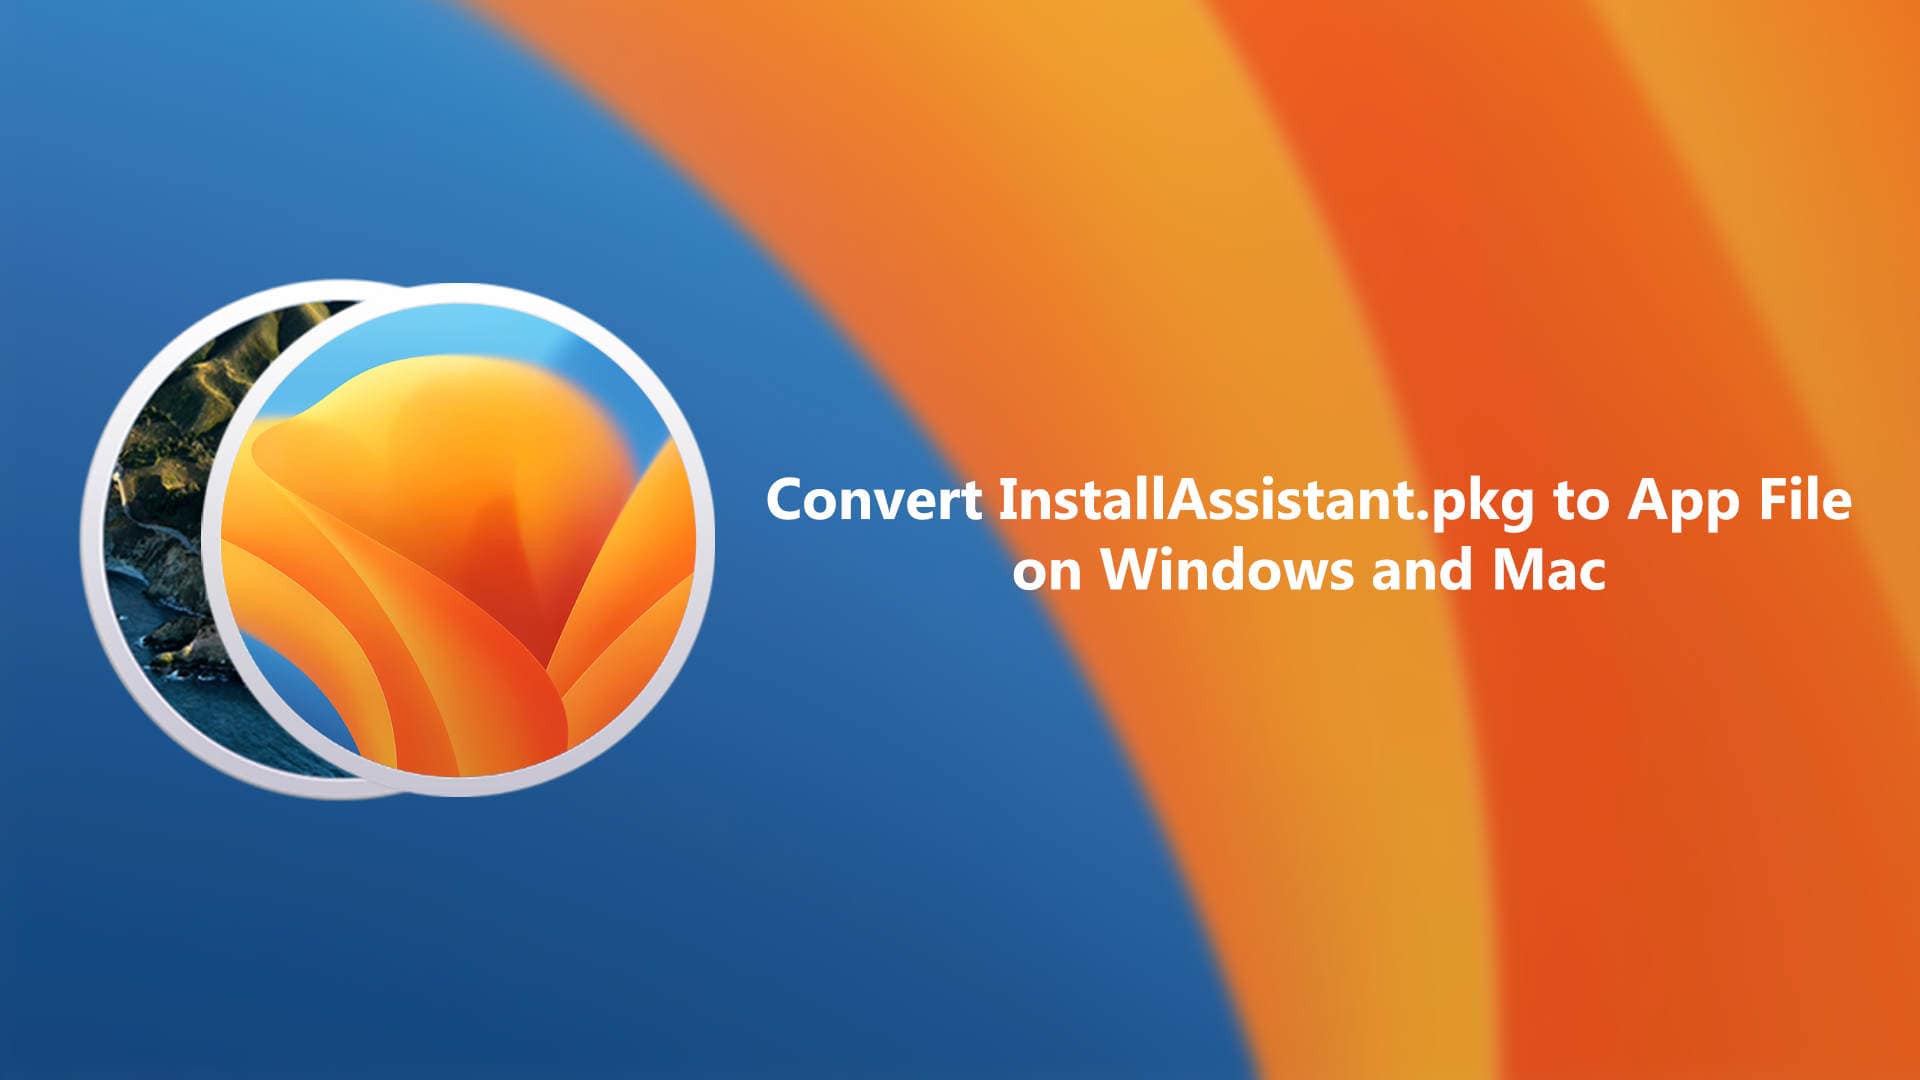 How to Convert InstallAssistant pkg to app file on Windows and Mac